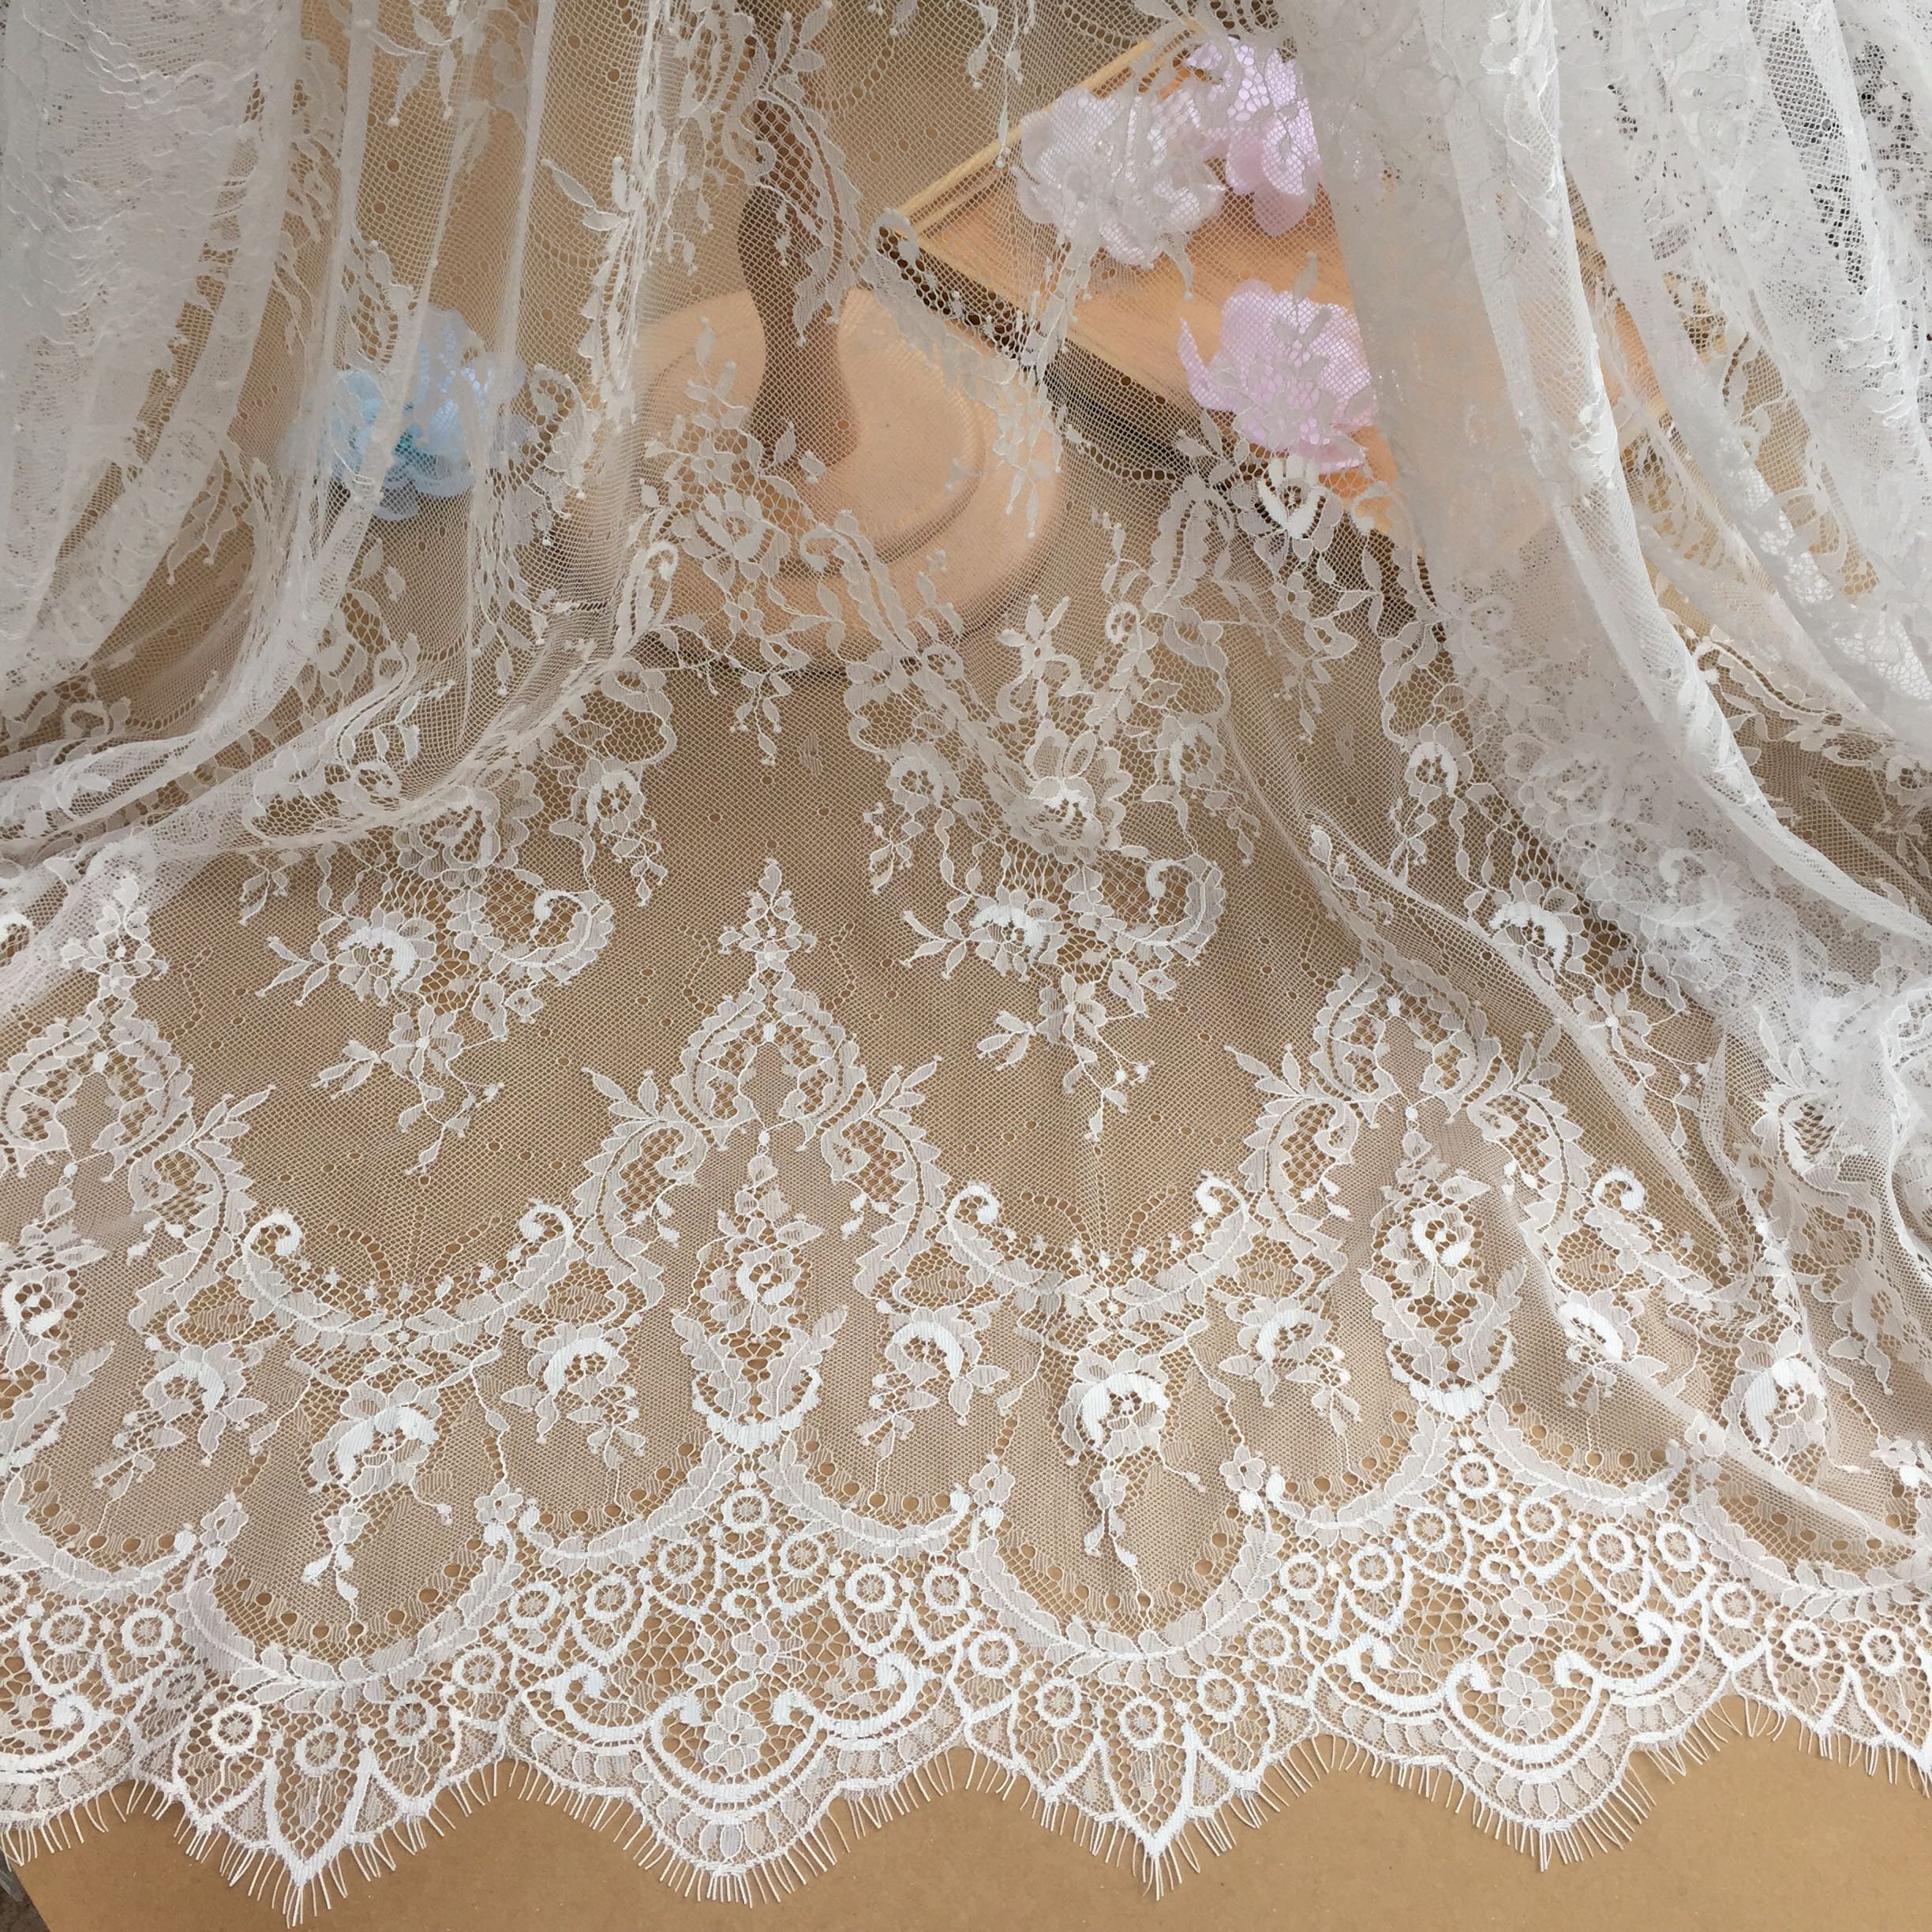 Off White Chantilly Lace Fabric, French Chantilly Lace,wedding Lace Fabric  With Scalloped Borders, Bridal Lace Fabric 